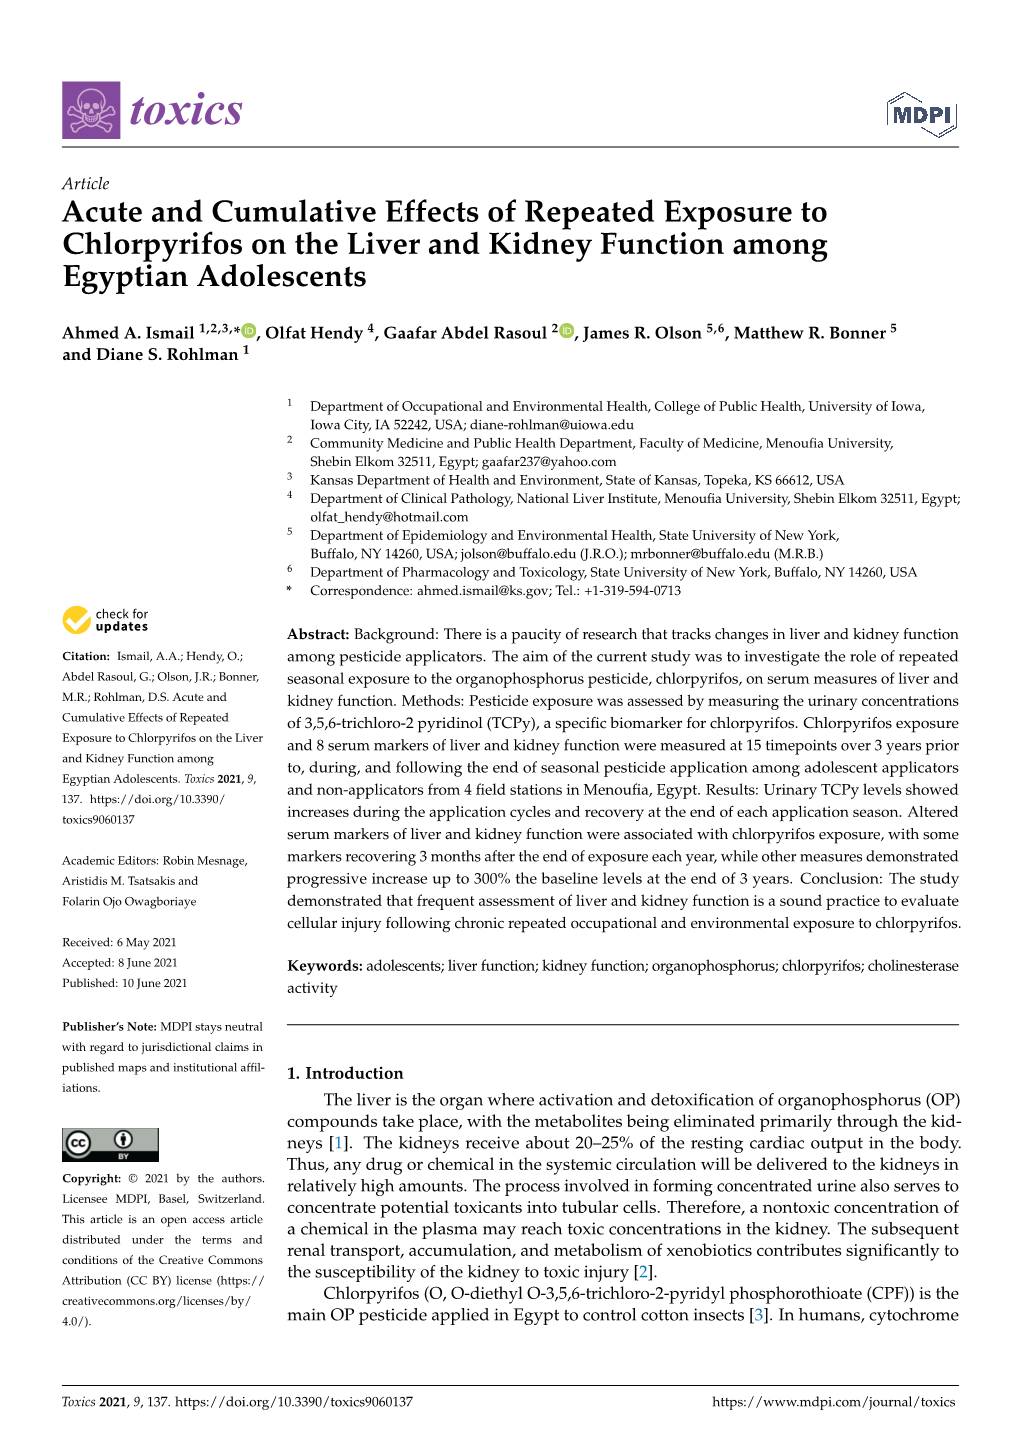 Acute and Cumulative Effects of Repeated Exposure to Chlorpyrifos on the Liver and Kidney Function Among Egyptian Adolescents